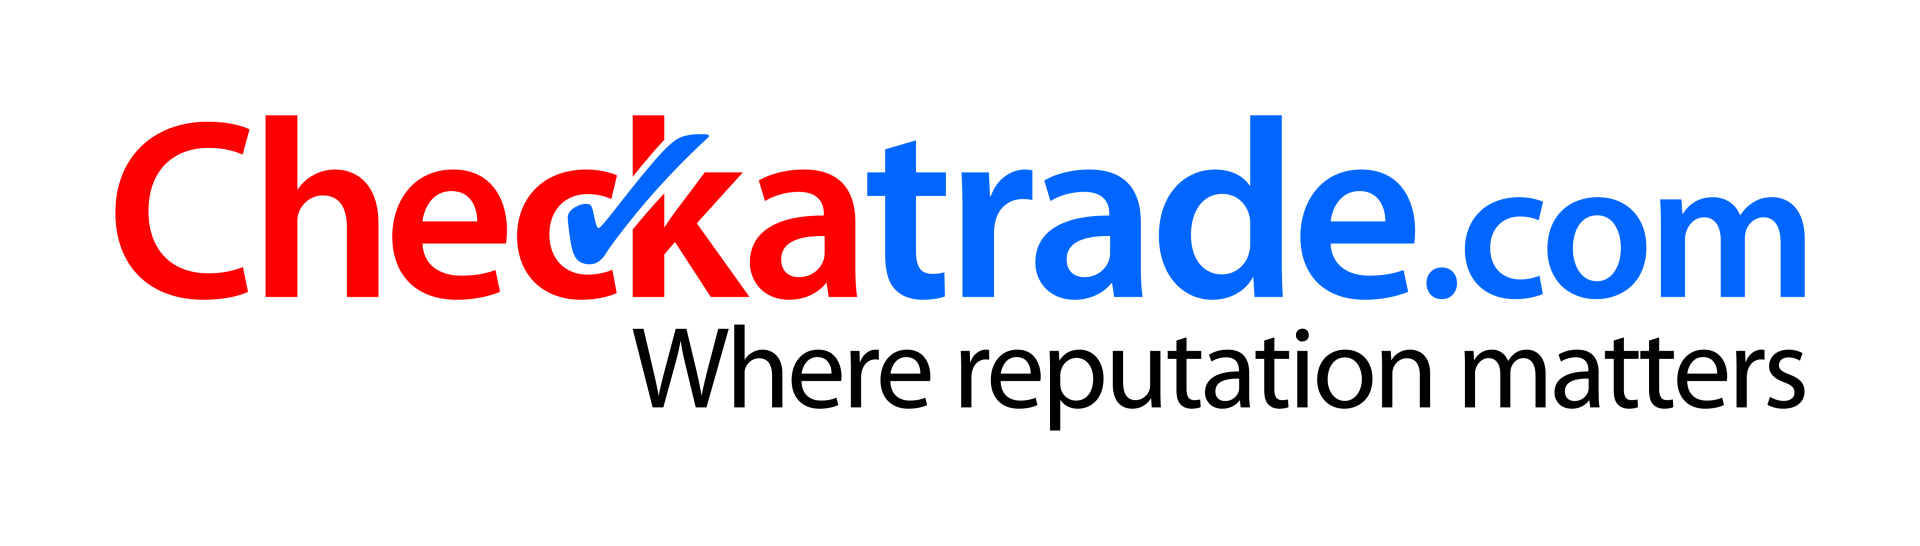 Corbridge roofers Masterhouse Services  Limited are  proud members of Checkatrade